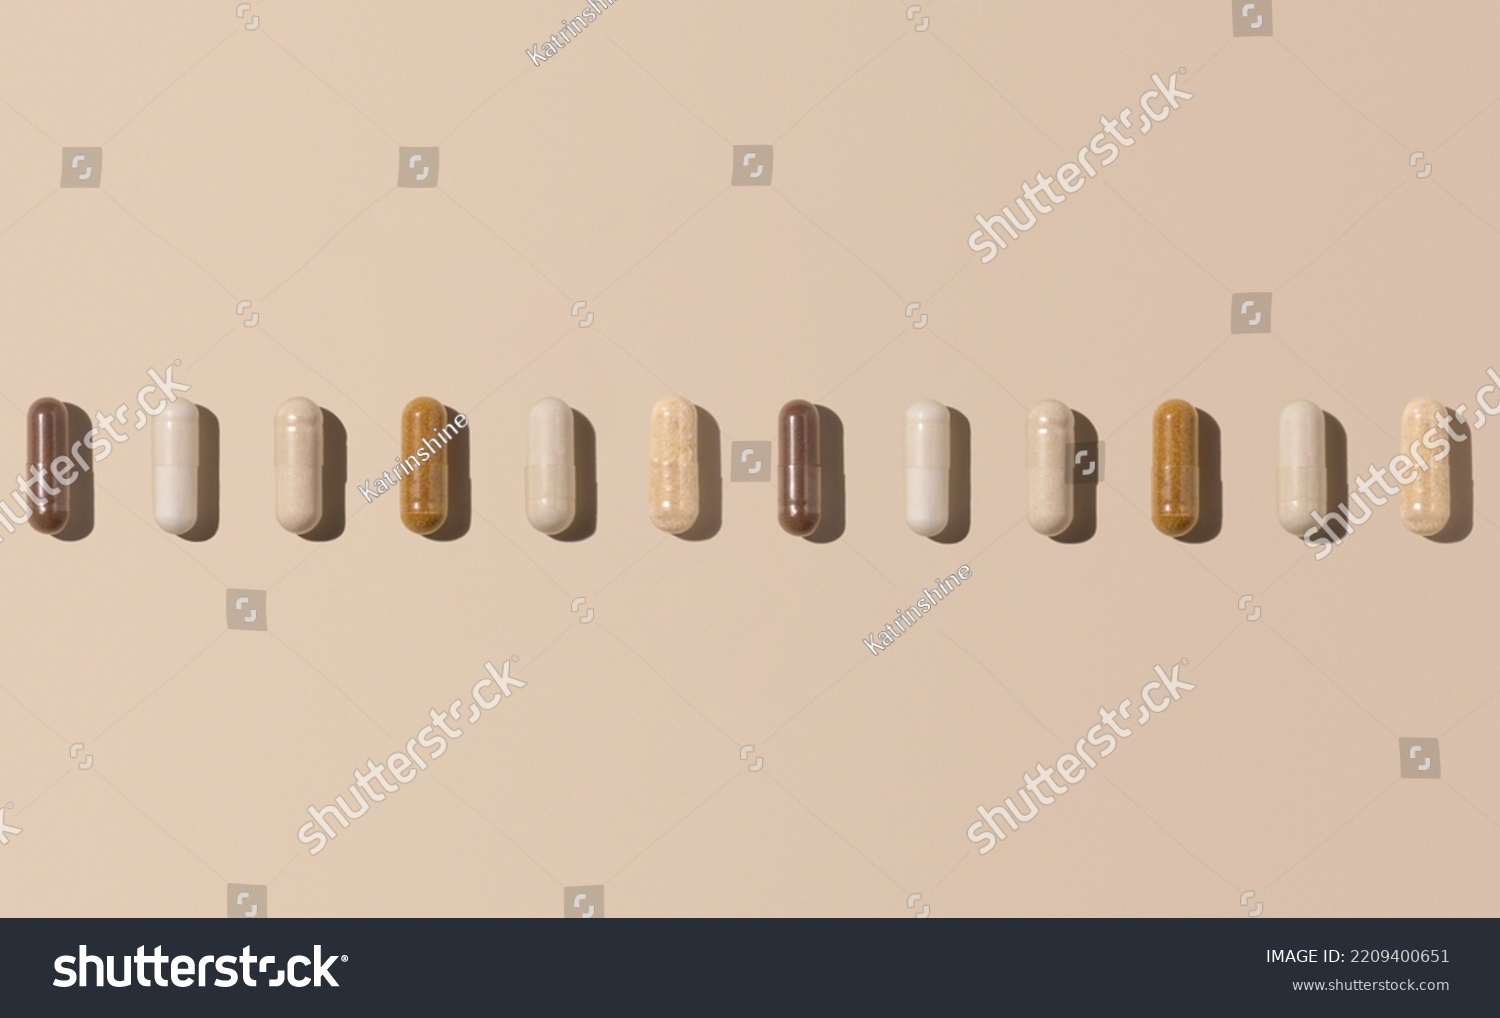 Mix of medical capsules in a line on light beige top view, hard shadows. Preventive medicine and healthcare, dietary supplements and vitamins.  Assorted pharmaceutical medicine capsules #2209400651